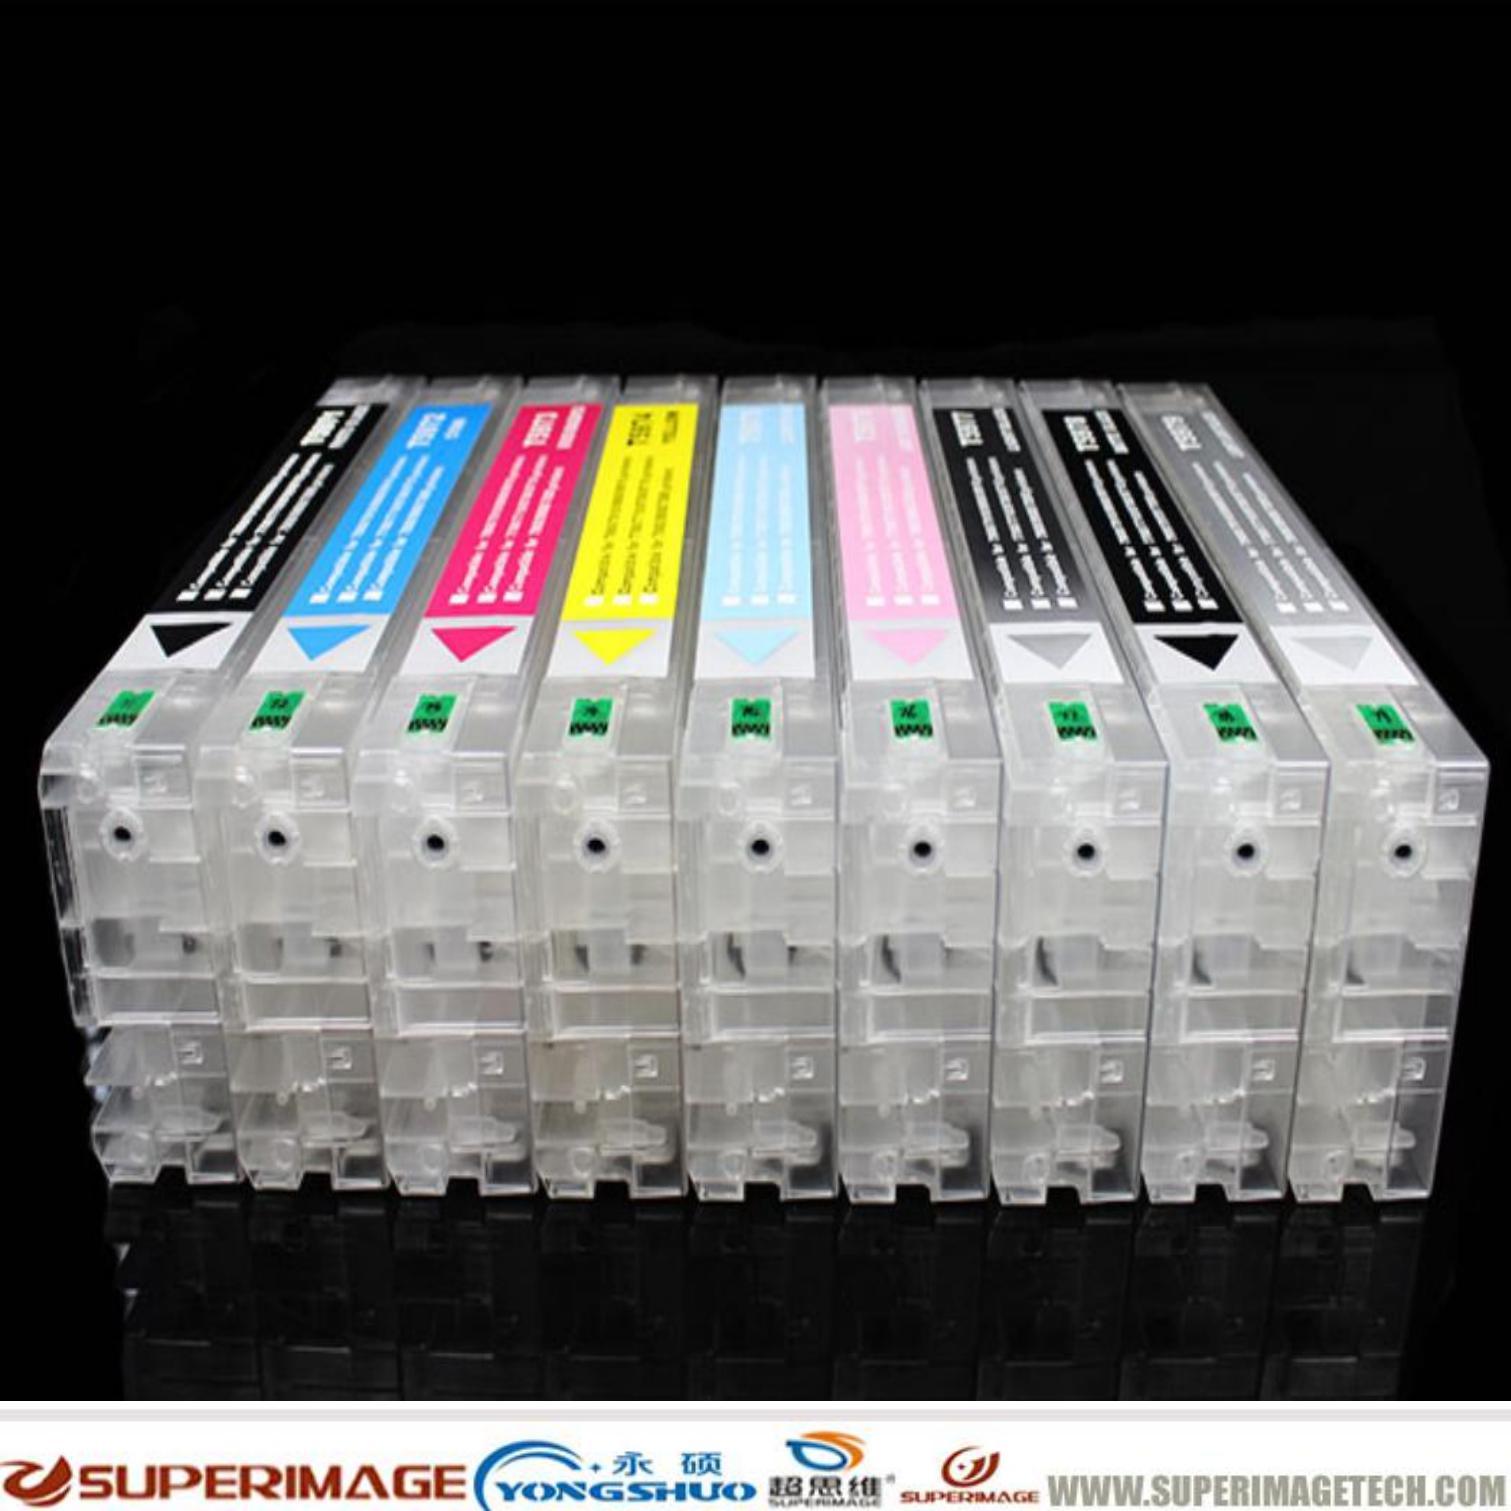 700ml Pigment Ink Cartridge for 7900/9900/7700/9700